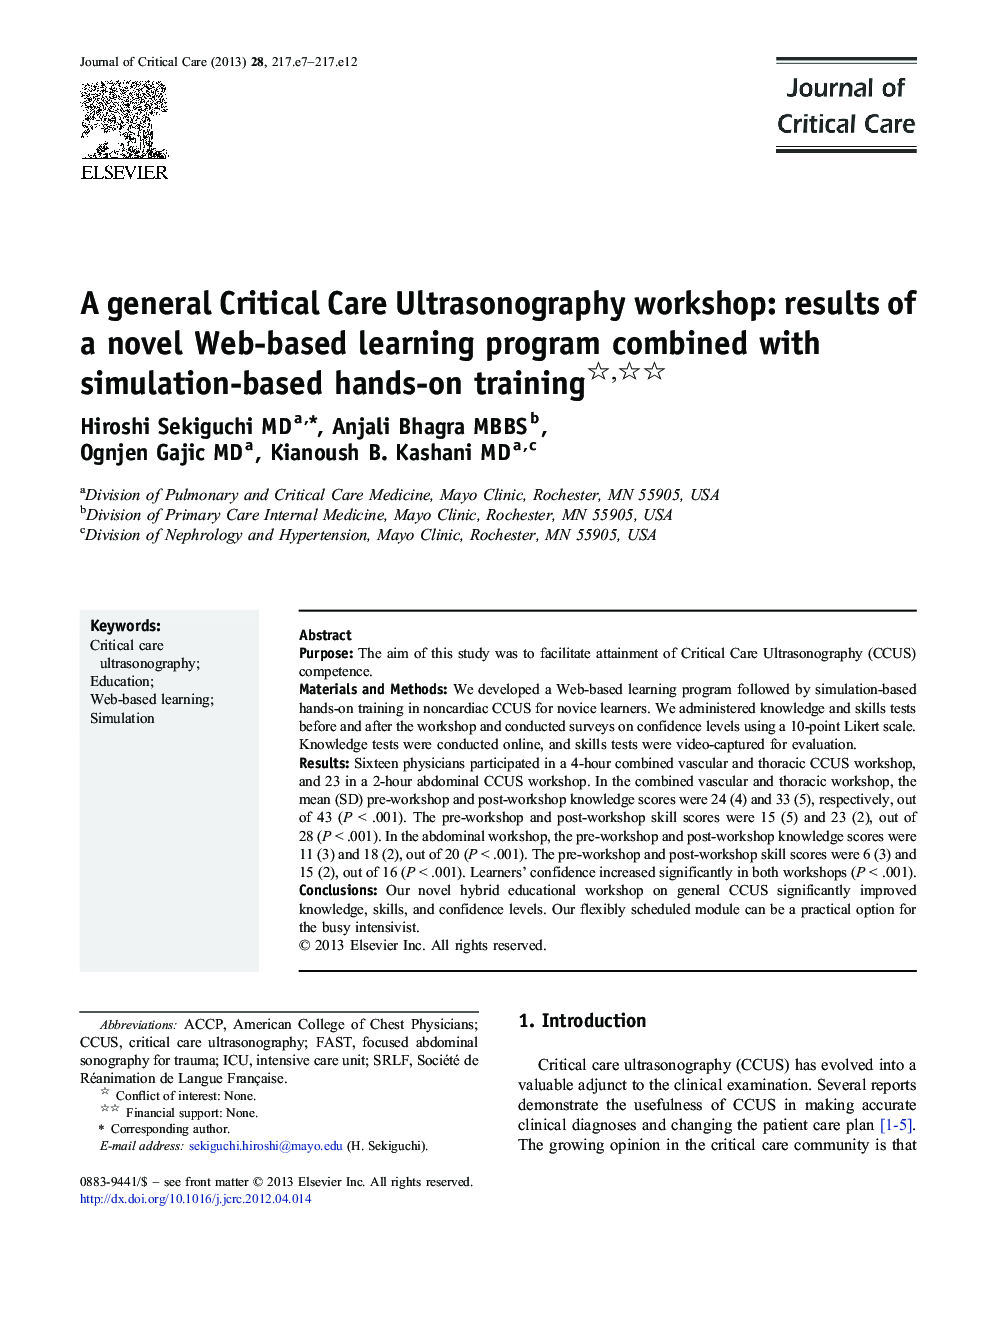 A general Critical Care Ultrasonography workshop: results of a novel Web-based learning program combined with simulation-based hands-on training